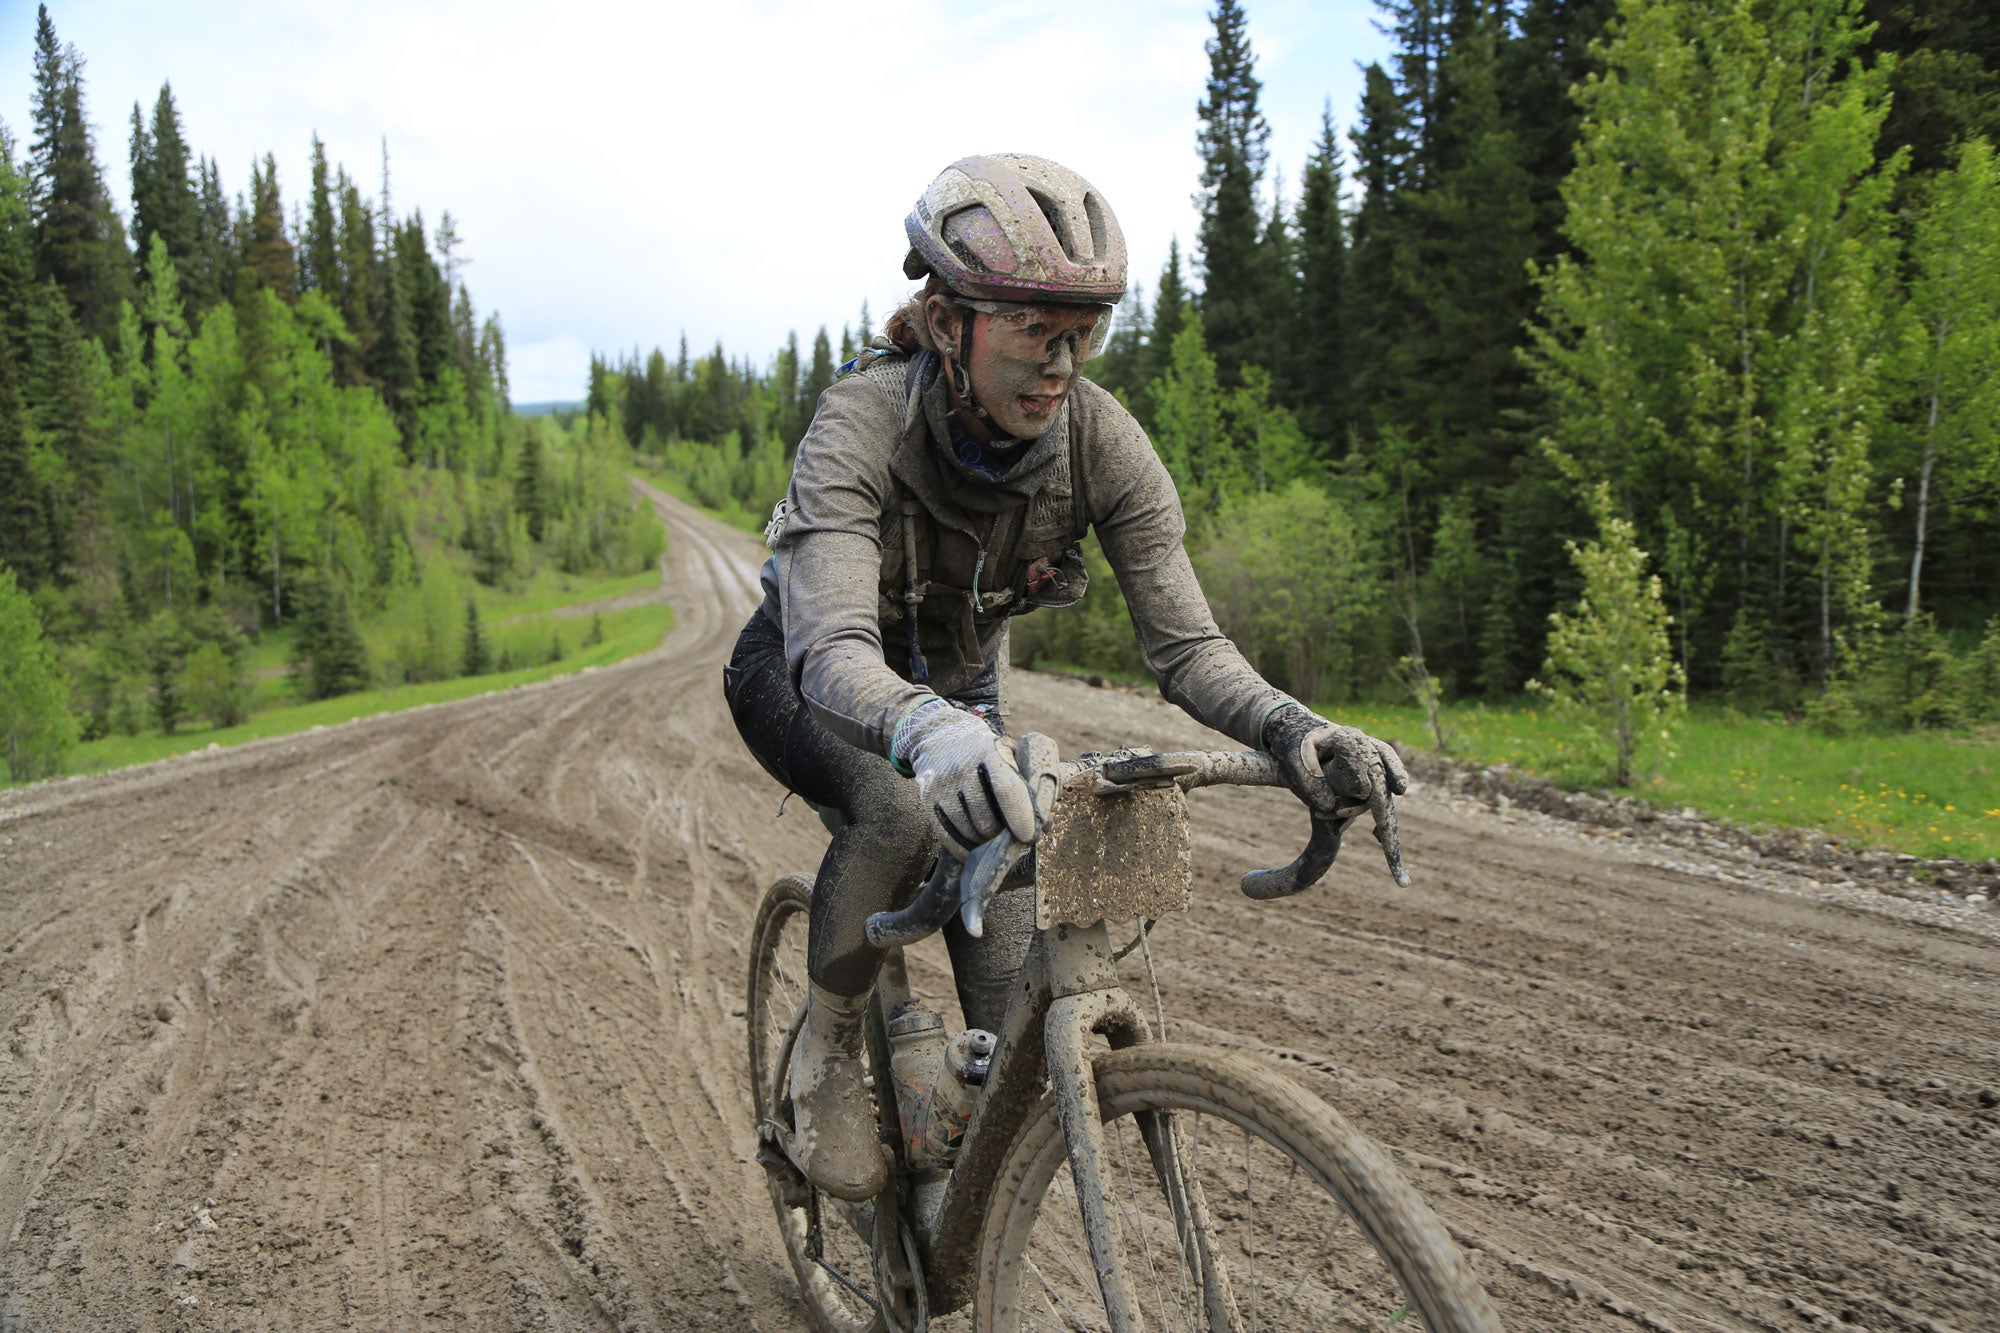 Kona Pro Development Rider Hannah Simms Reports from the Canadian Gravel Champs